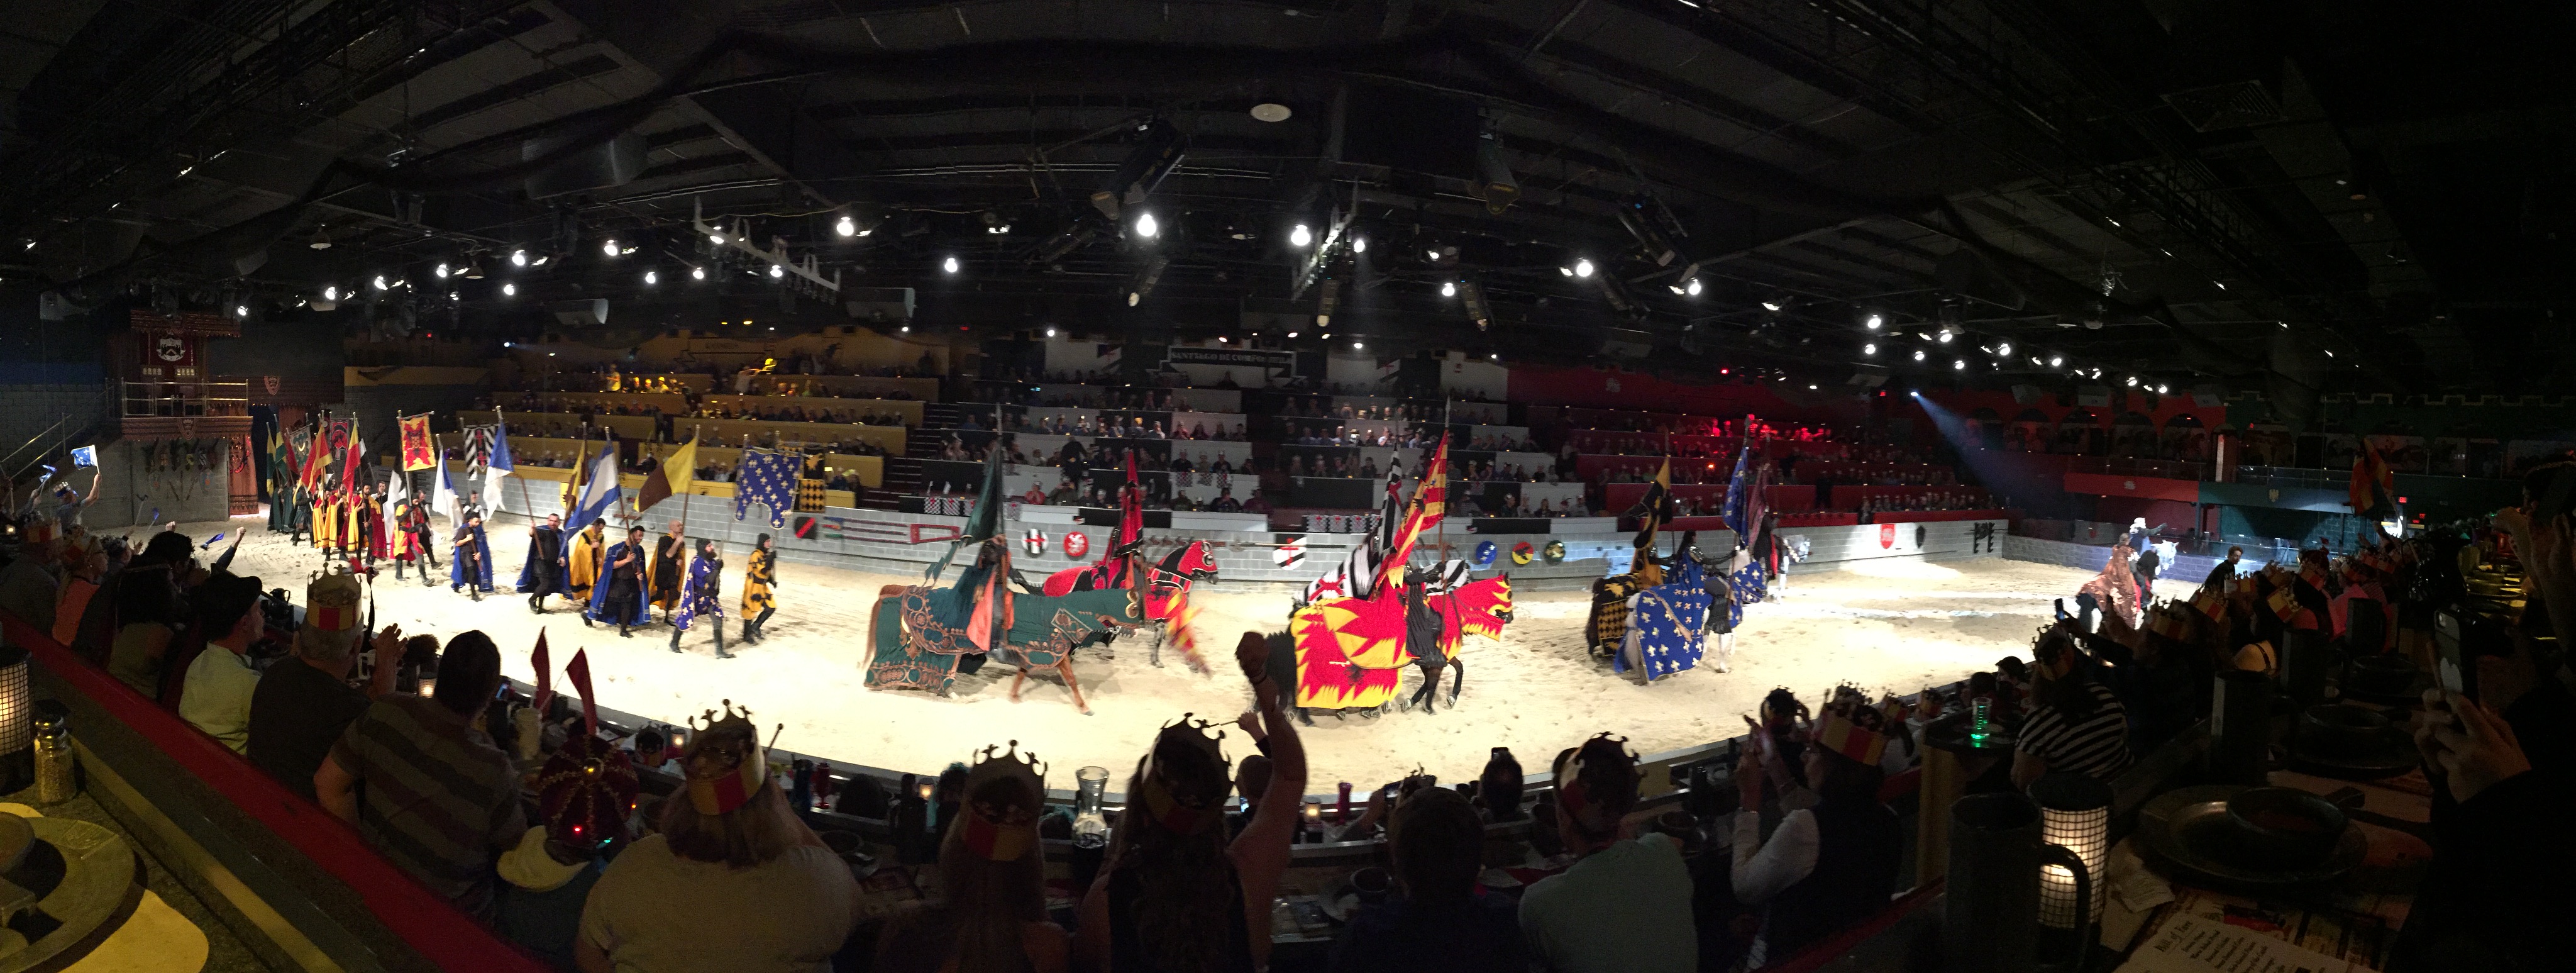 medieval times dinner show orlando florida | acupful.com | tips for medieval times | visit orlando | family travel florida | things to do with kids in orlando | mandy carter | Orlando dinner shows